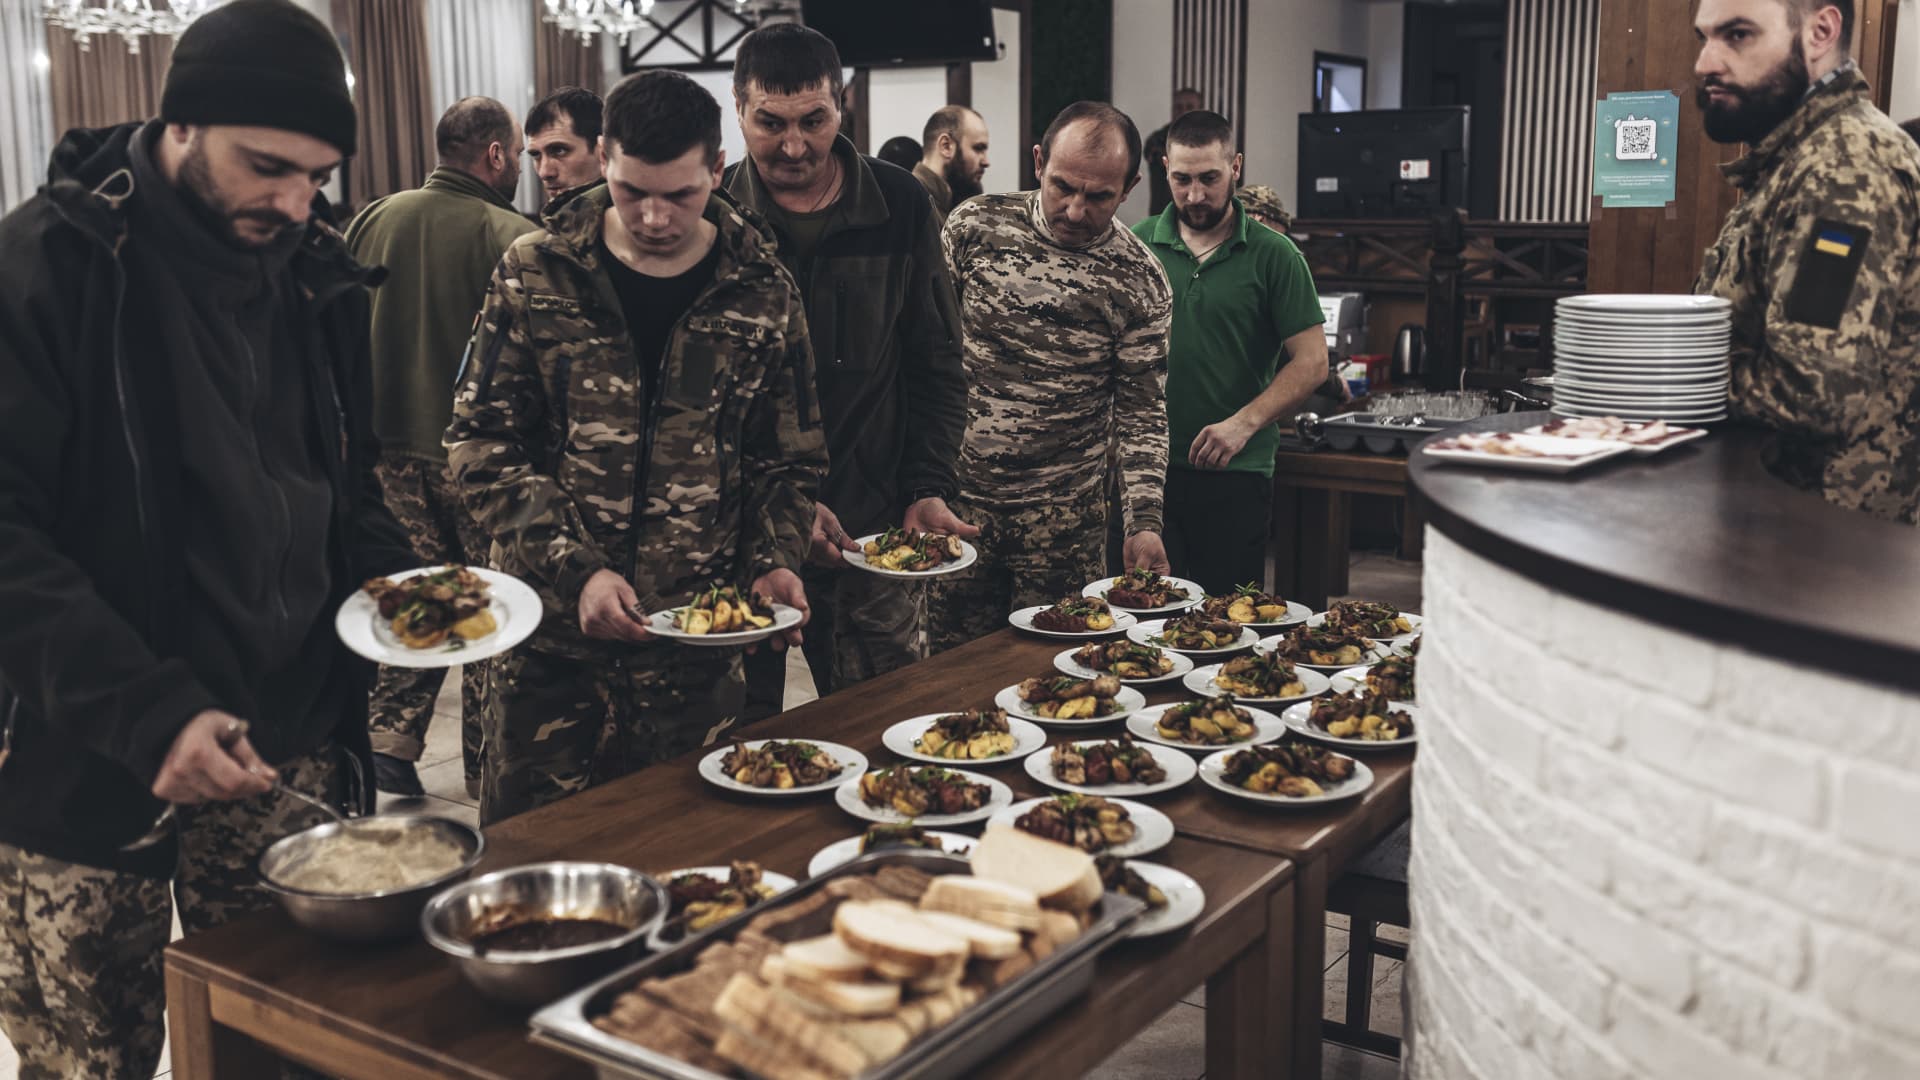 EASTERN UKRAINE, UKRAINE - MARCH 20: Ukrainian soldiers eat dinner after a small concert held for Ukrainian Army at a rehabilitation center in eastern Ukraine as Russia-Ukraine war continues on March 20, 2023. (Photo by Diego Herrera Carcedo/Anadolu Agency via Getty Images)